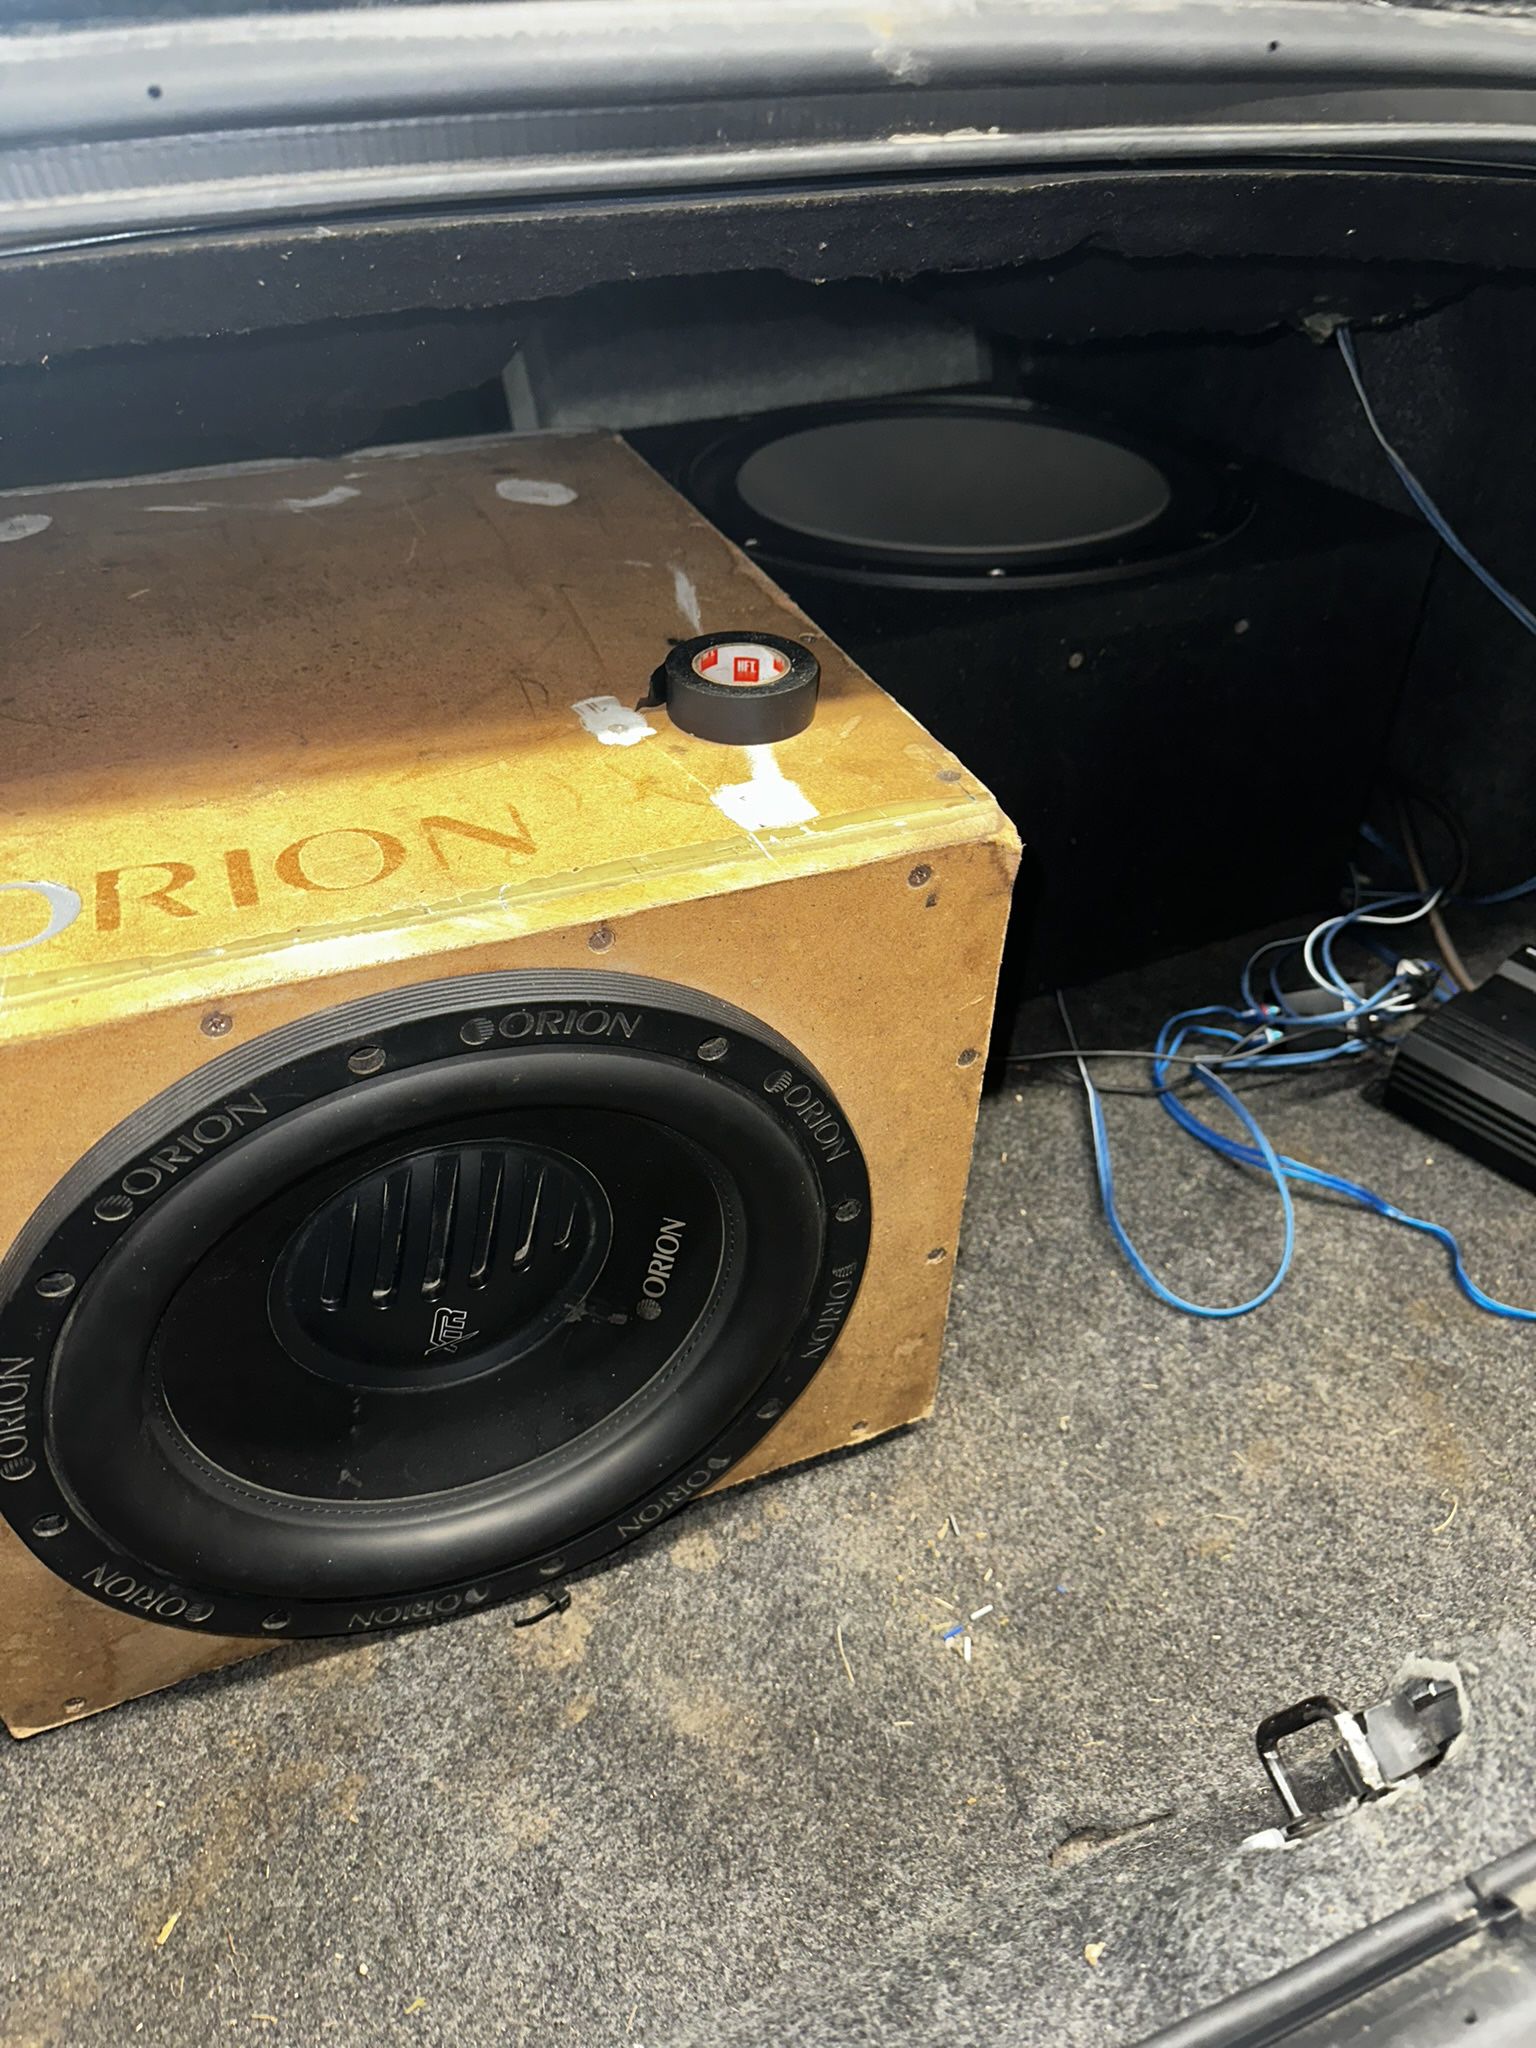 12”&15” sub amp and wires 